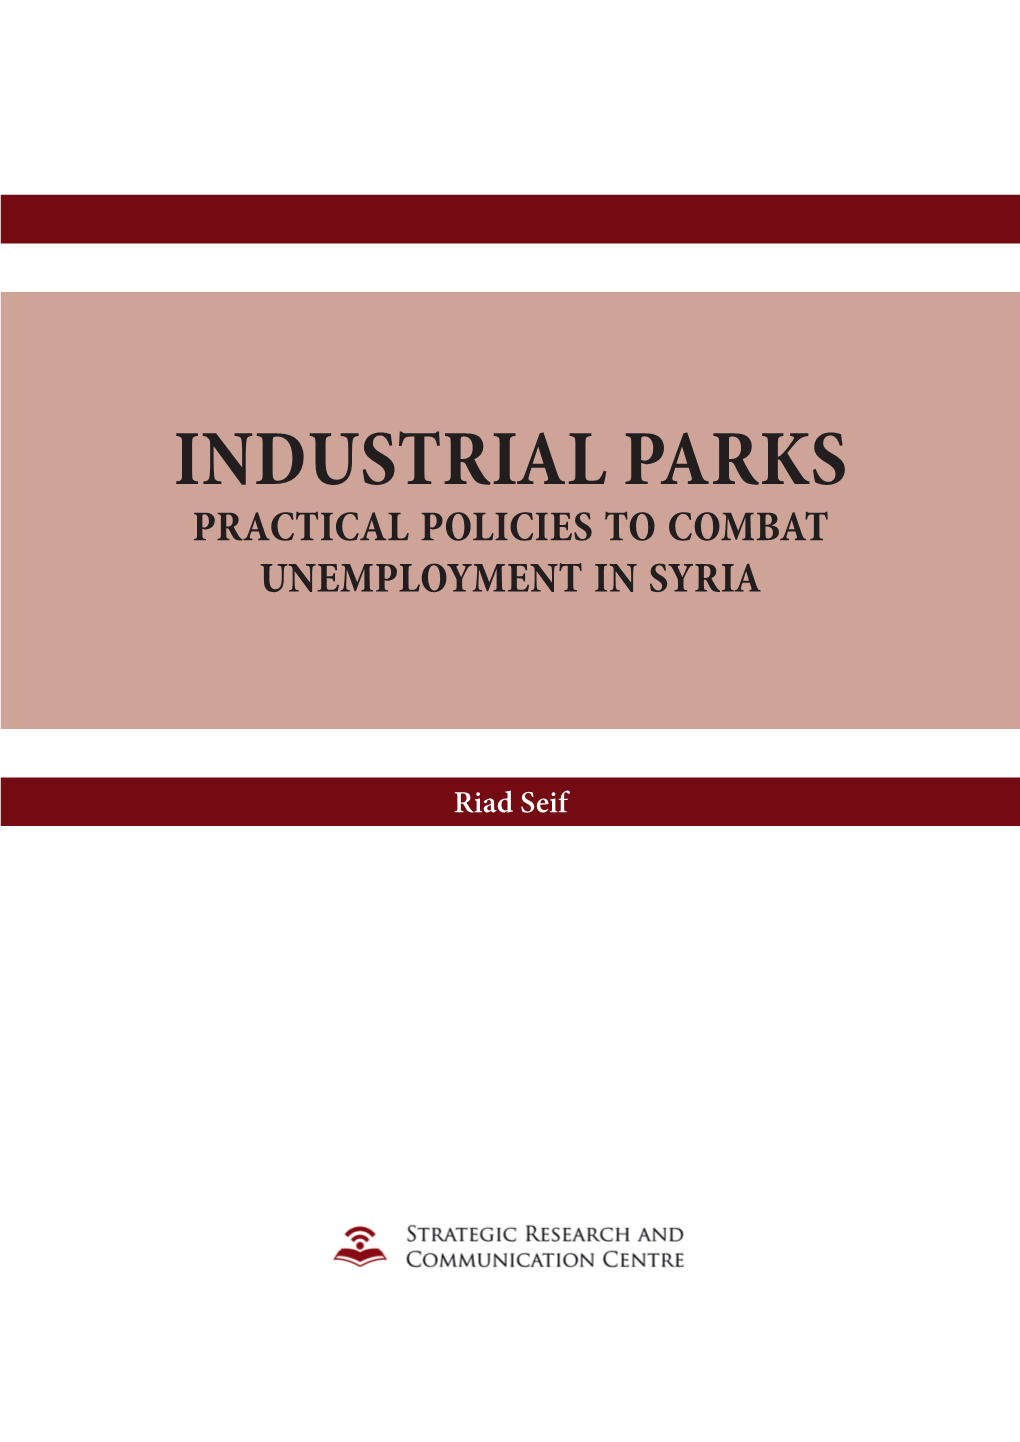 Industrial Parks Practical Policies to Combat Unemployment in Syria